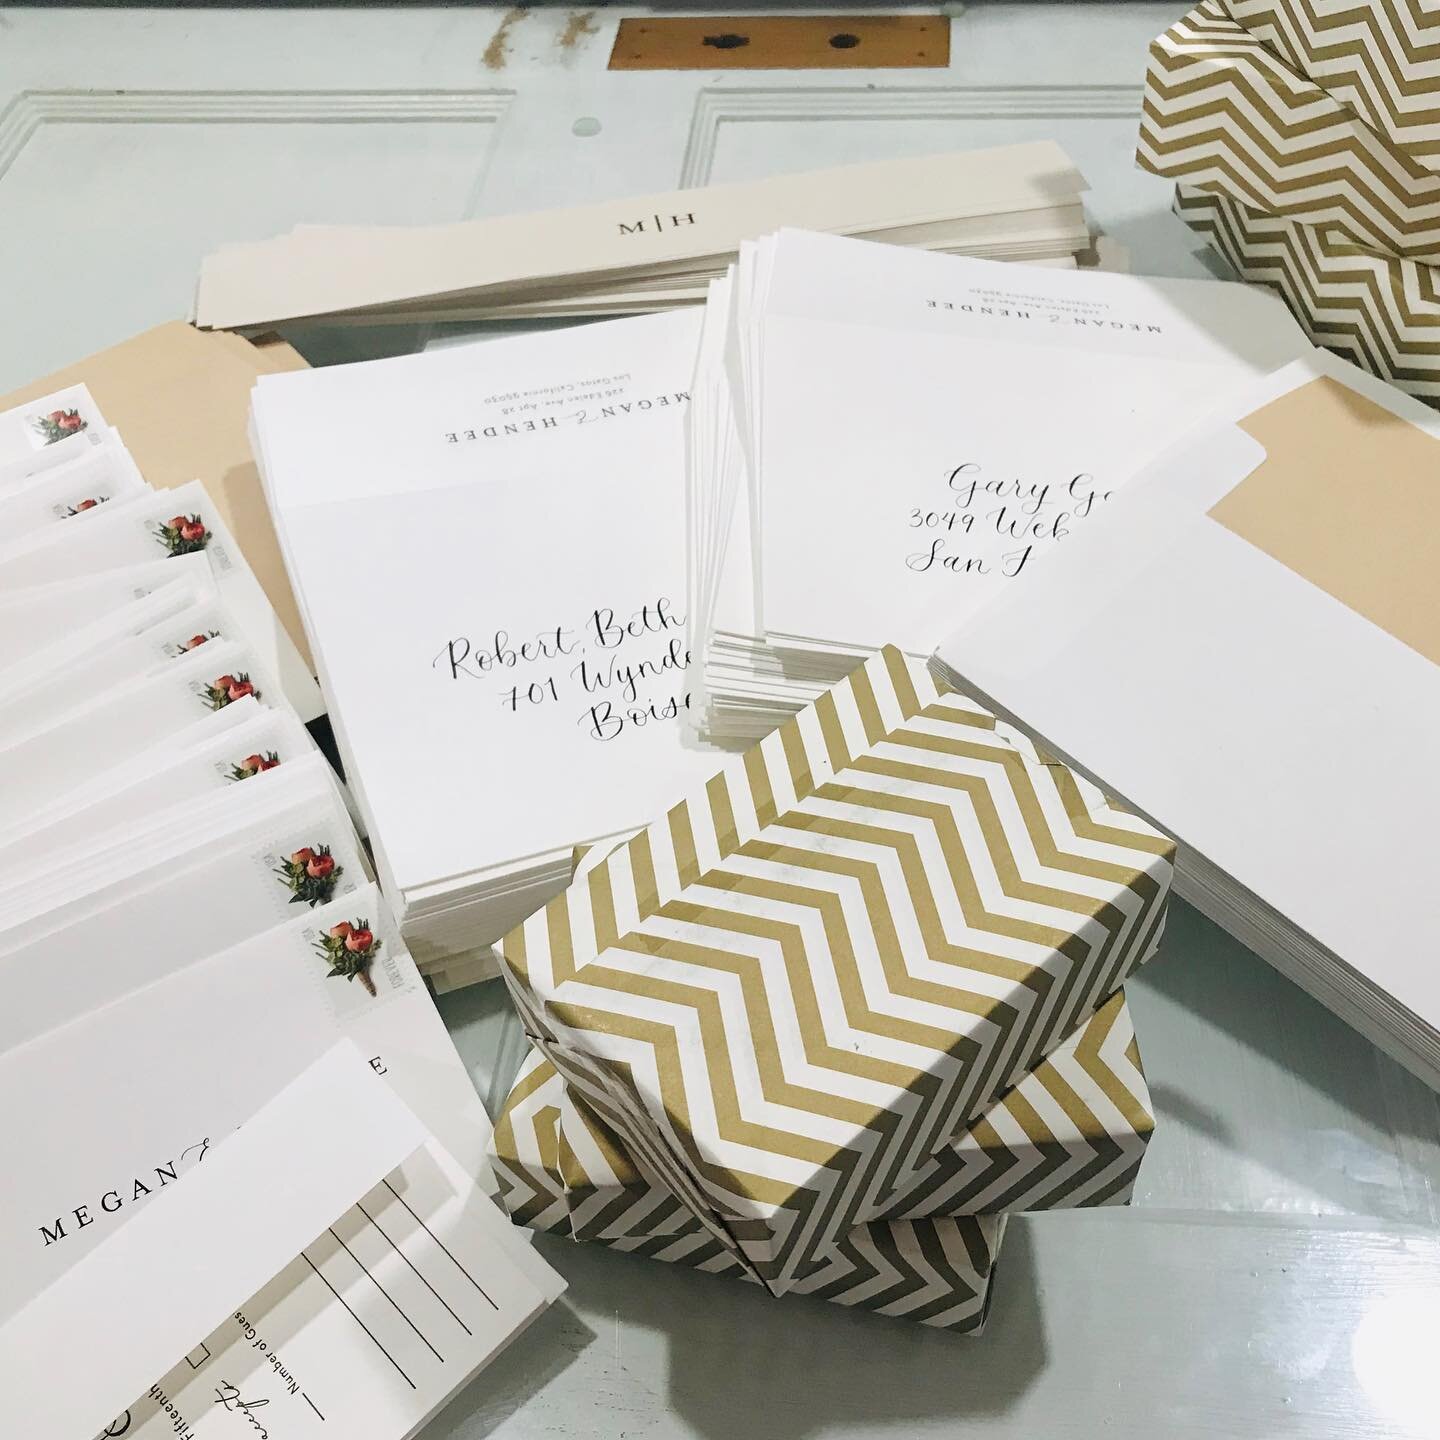 If any of you know me the assembly is my favorite part. Today is for lots of cutting, glueing and putting the pieces together!! #stationery #weddinginvitations #boisestationery #custominvitations